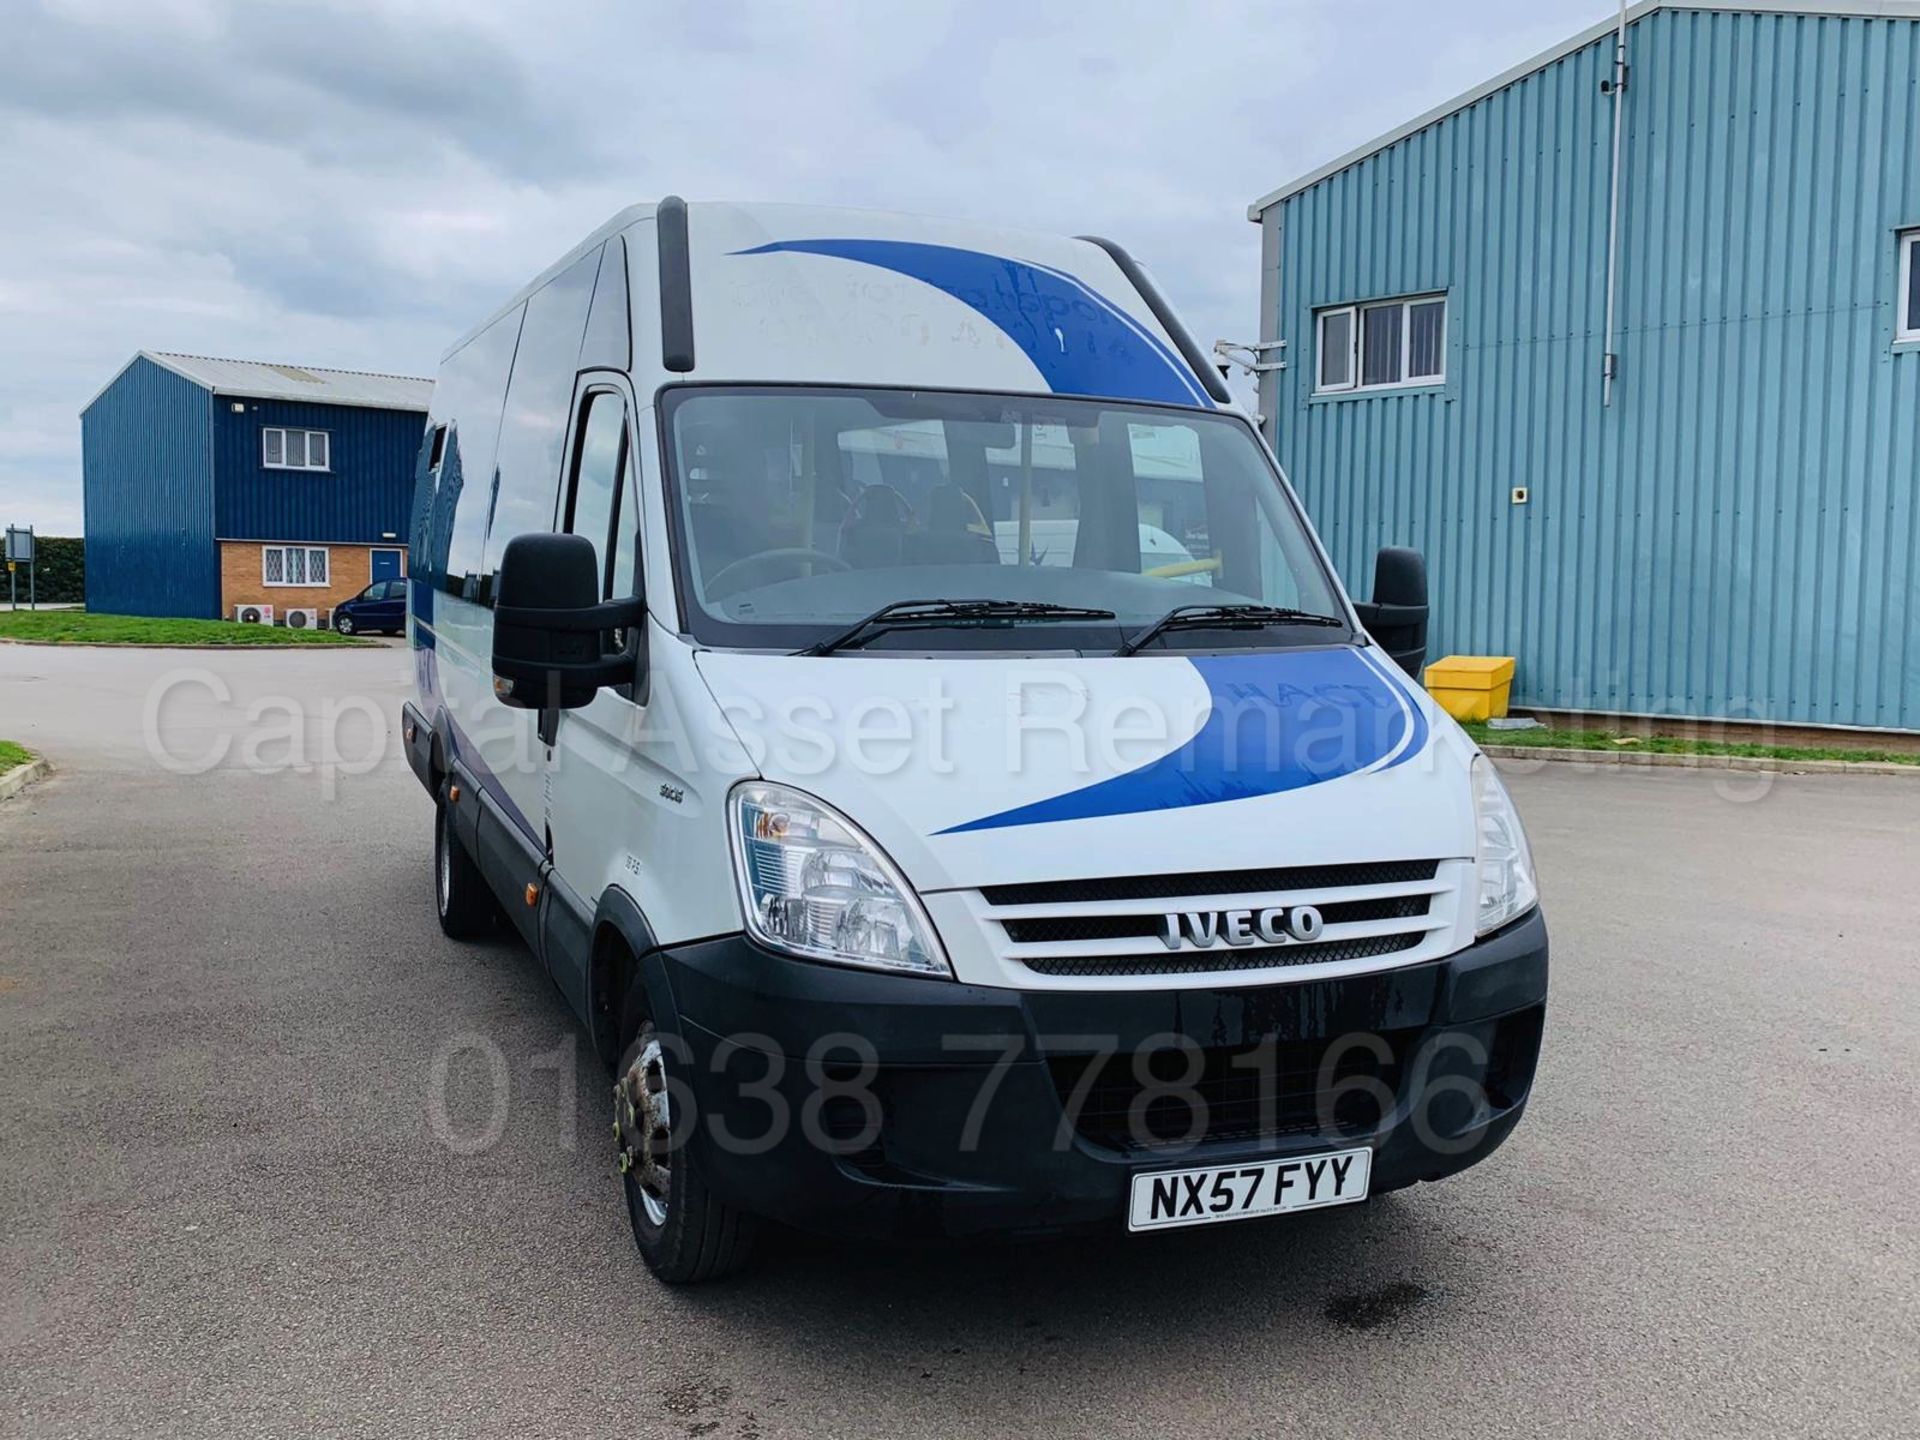 (On Sale) IVECO DAILY *LWB - 16 SEATER MINI-BUS / COACH* (57 REG) '3.0 DIESEL' *WHEEL CHAIR RAMP* - Image 11 of 29